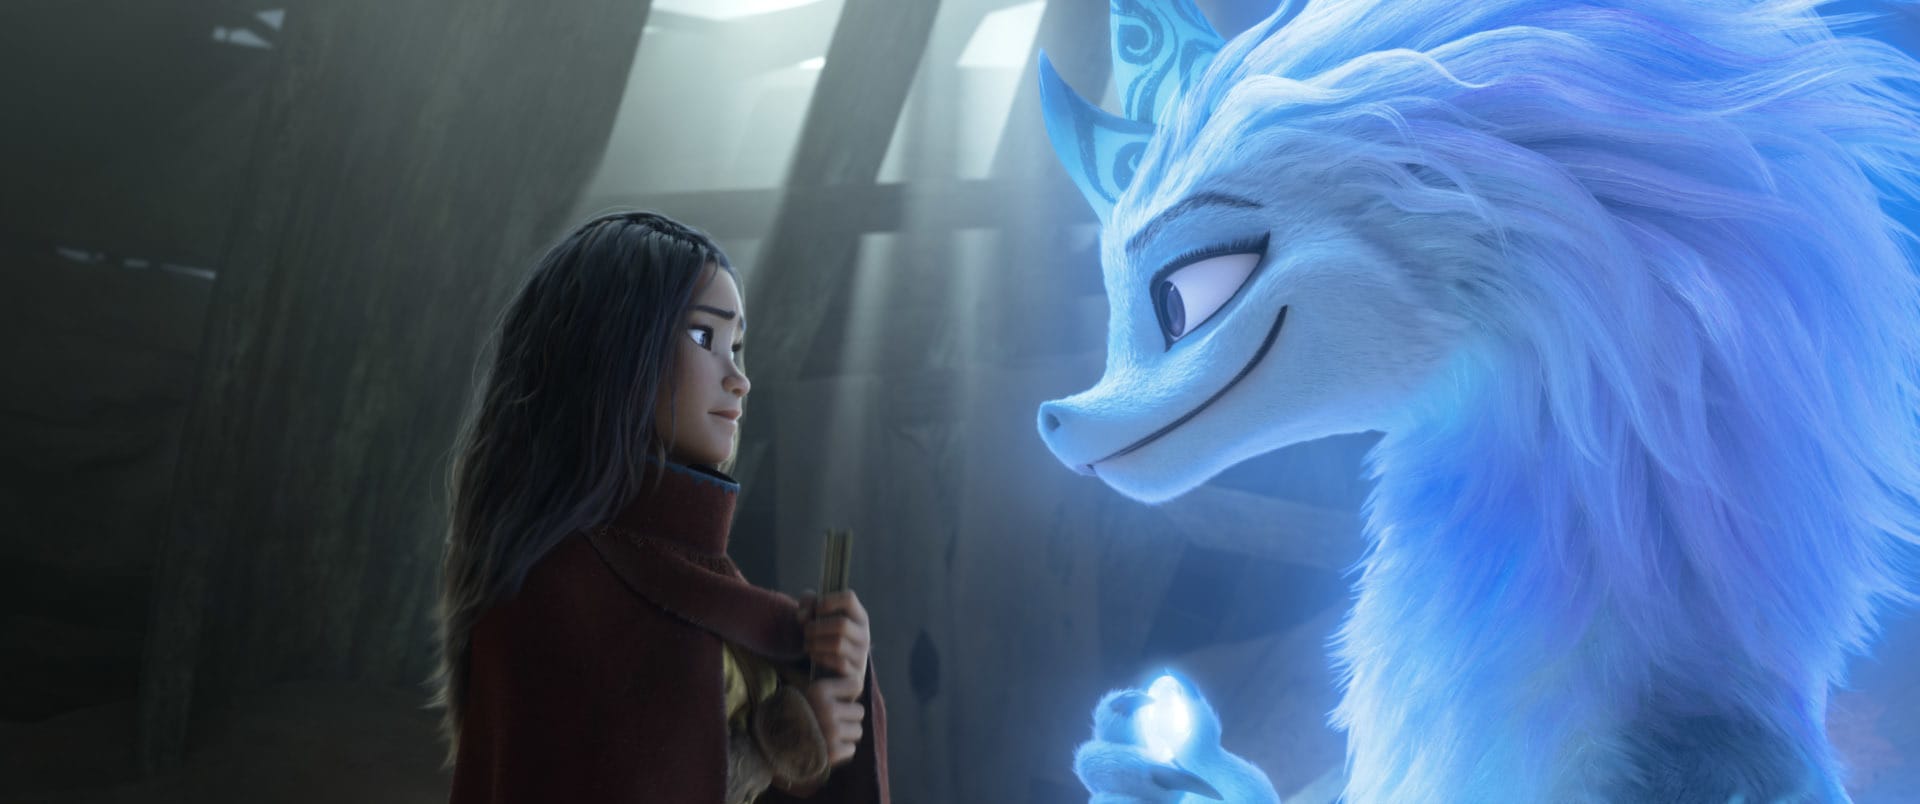 'Raya and the Last Dragon' Now in Theaters and on Disney+ Premier Access